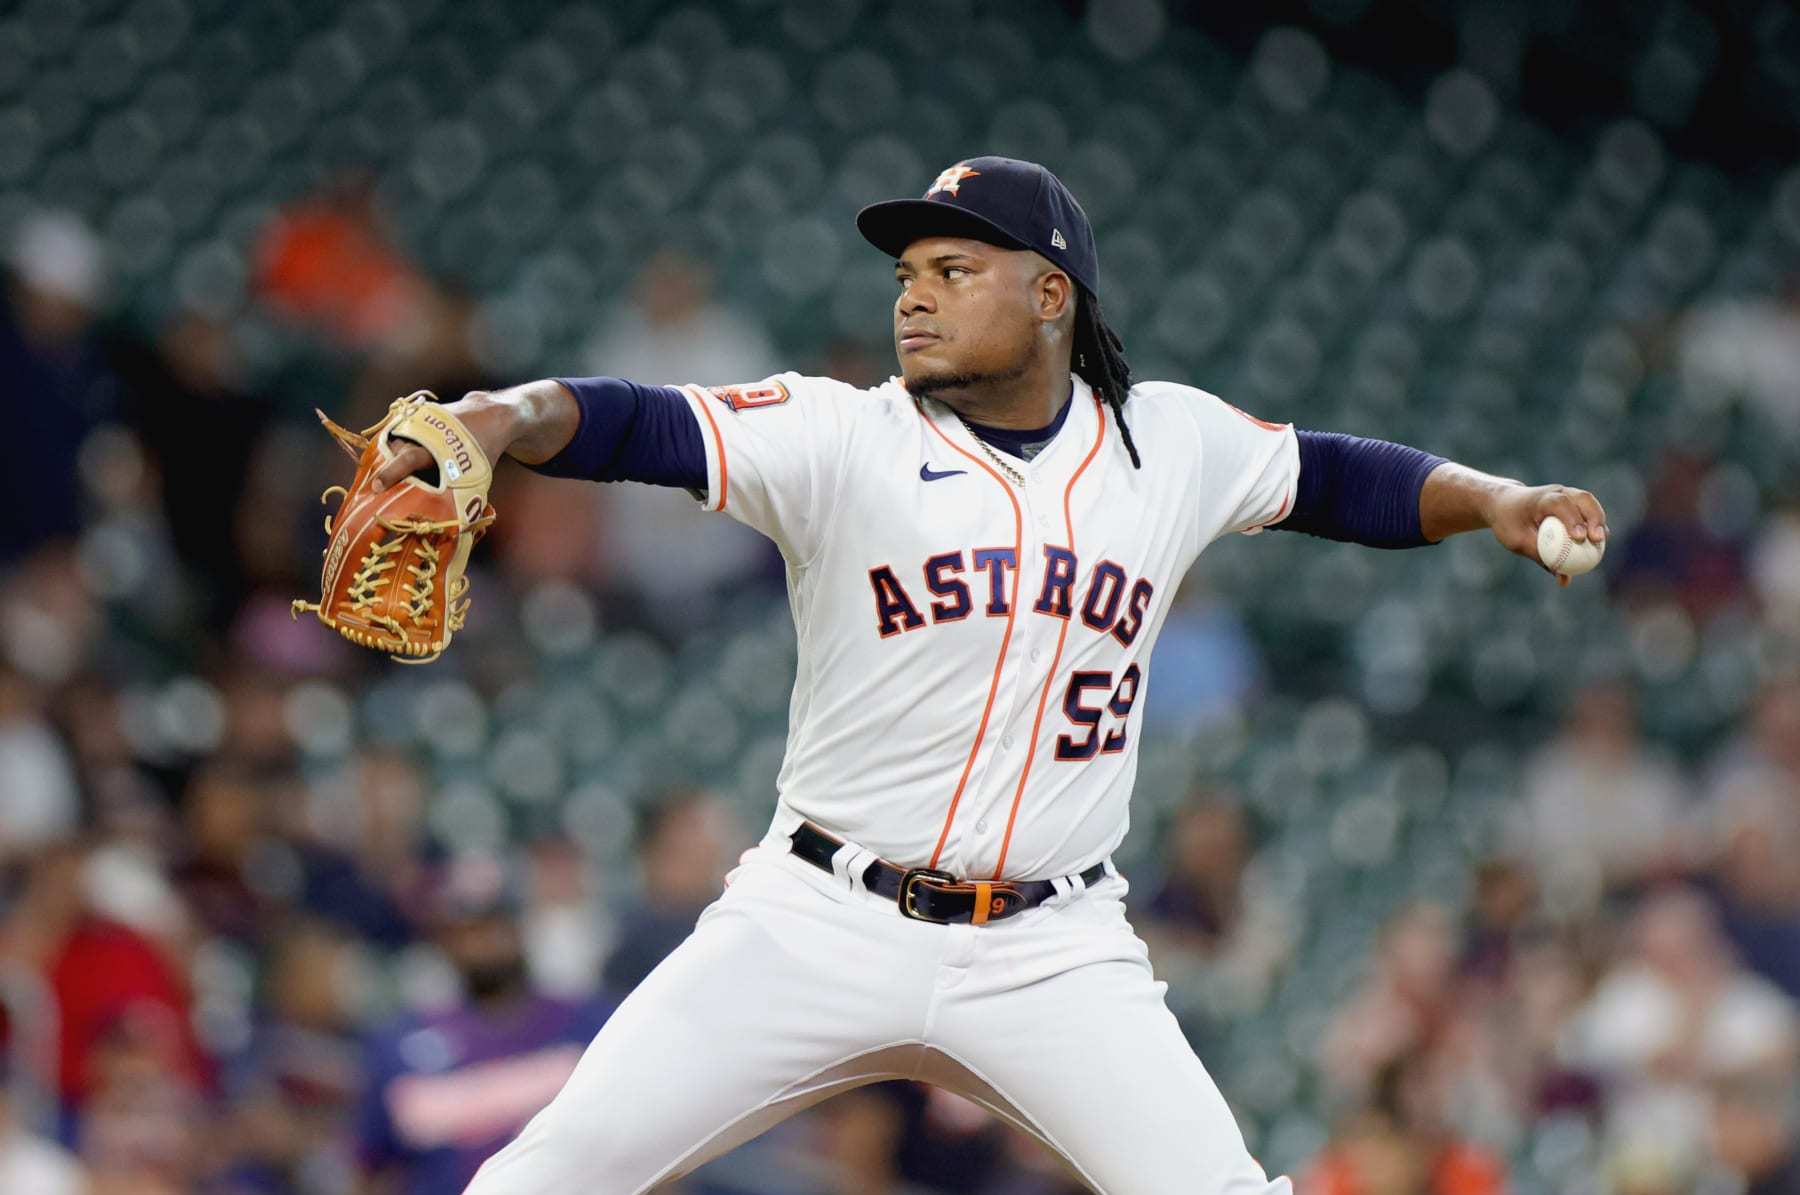 HOUSTON, TX - MAY 22: Houston Astros starting pitcher Jose Urquidy (65)  throws the ball to first base in the top of the first inning during the  baseball game between the Texas